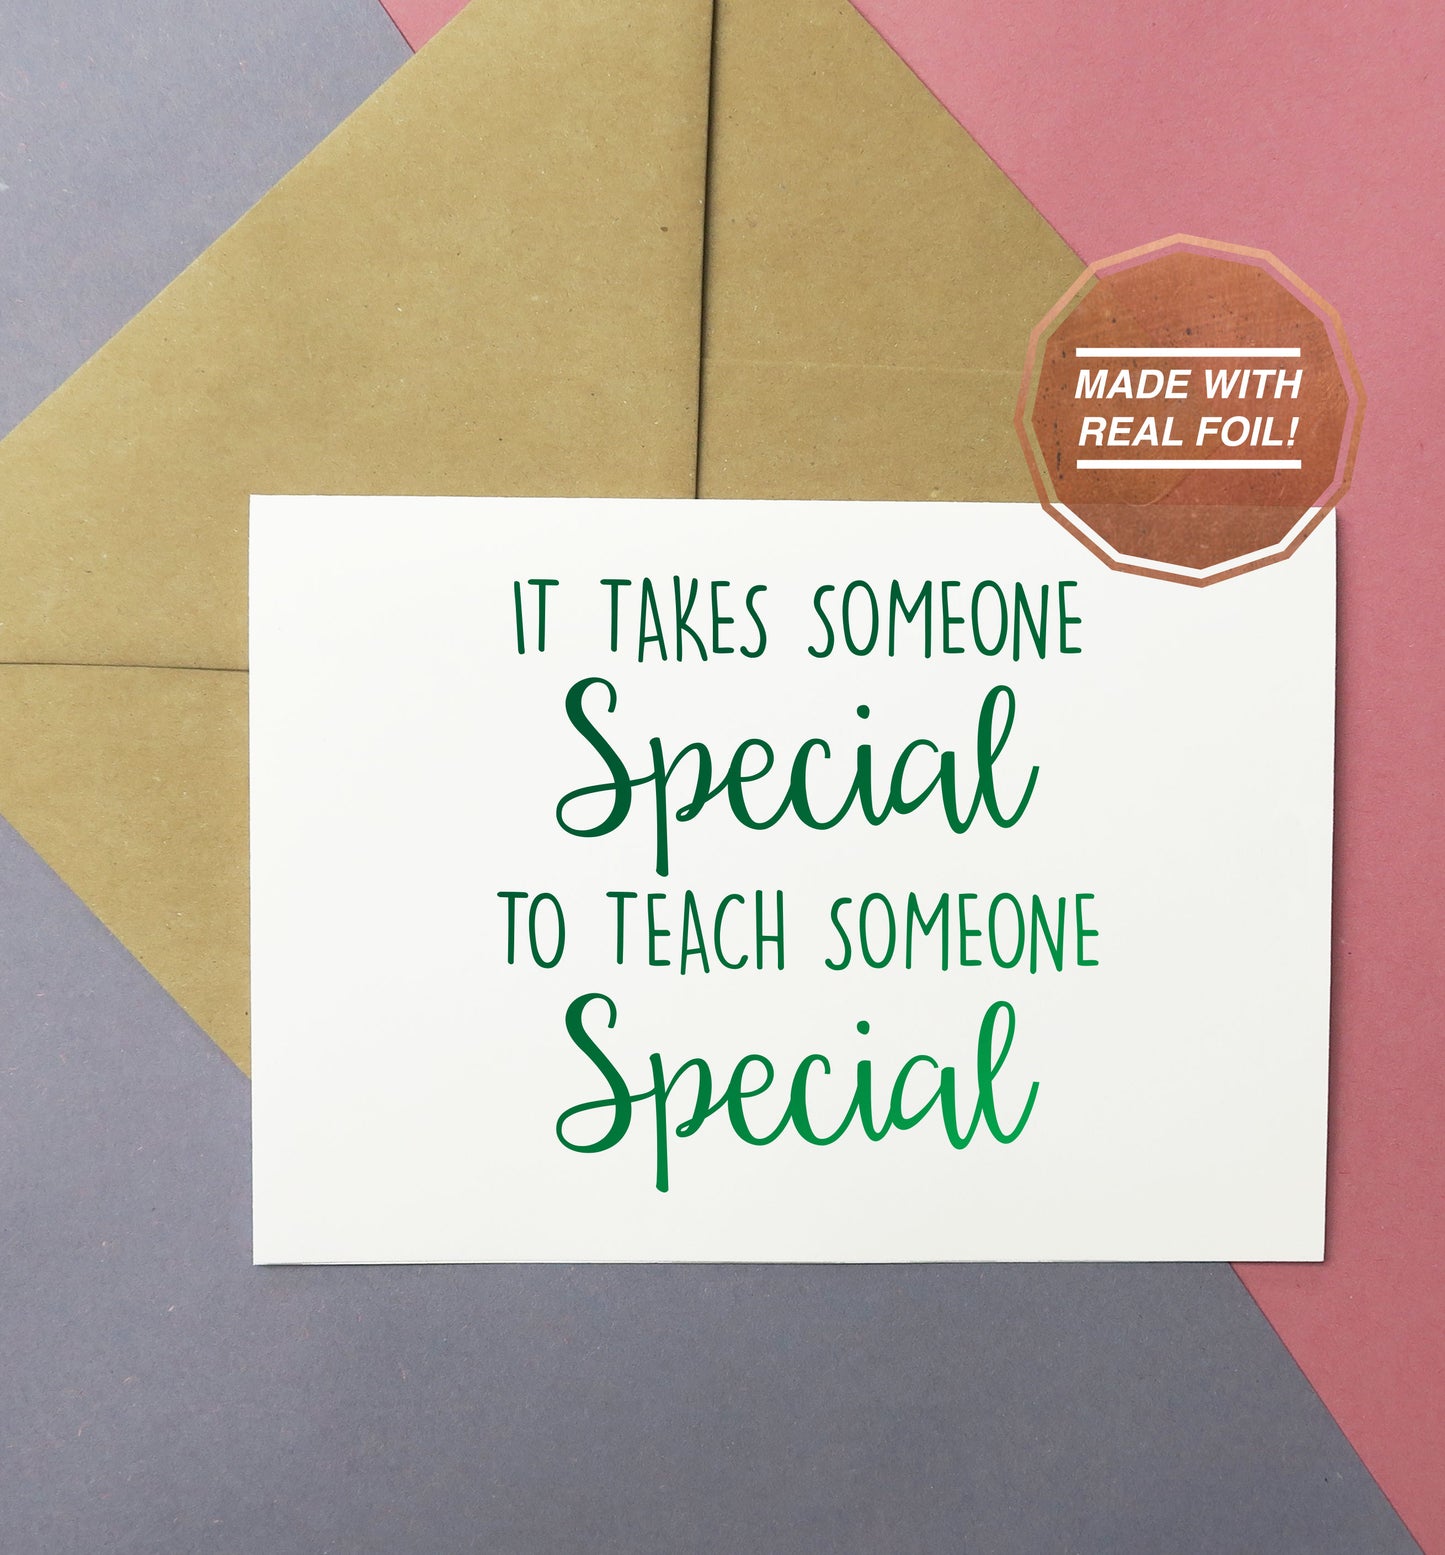 It takes someone special to teach someone special handmade foiled greeting card for teacher